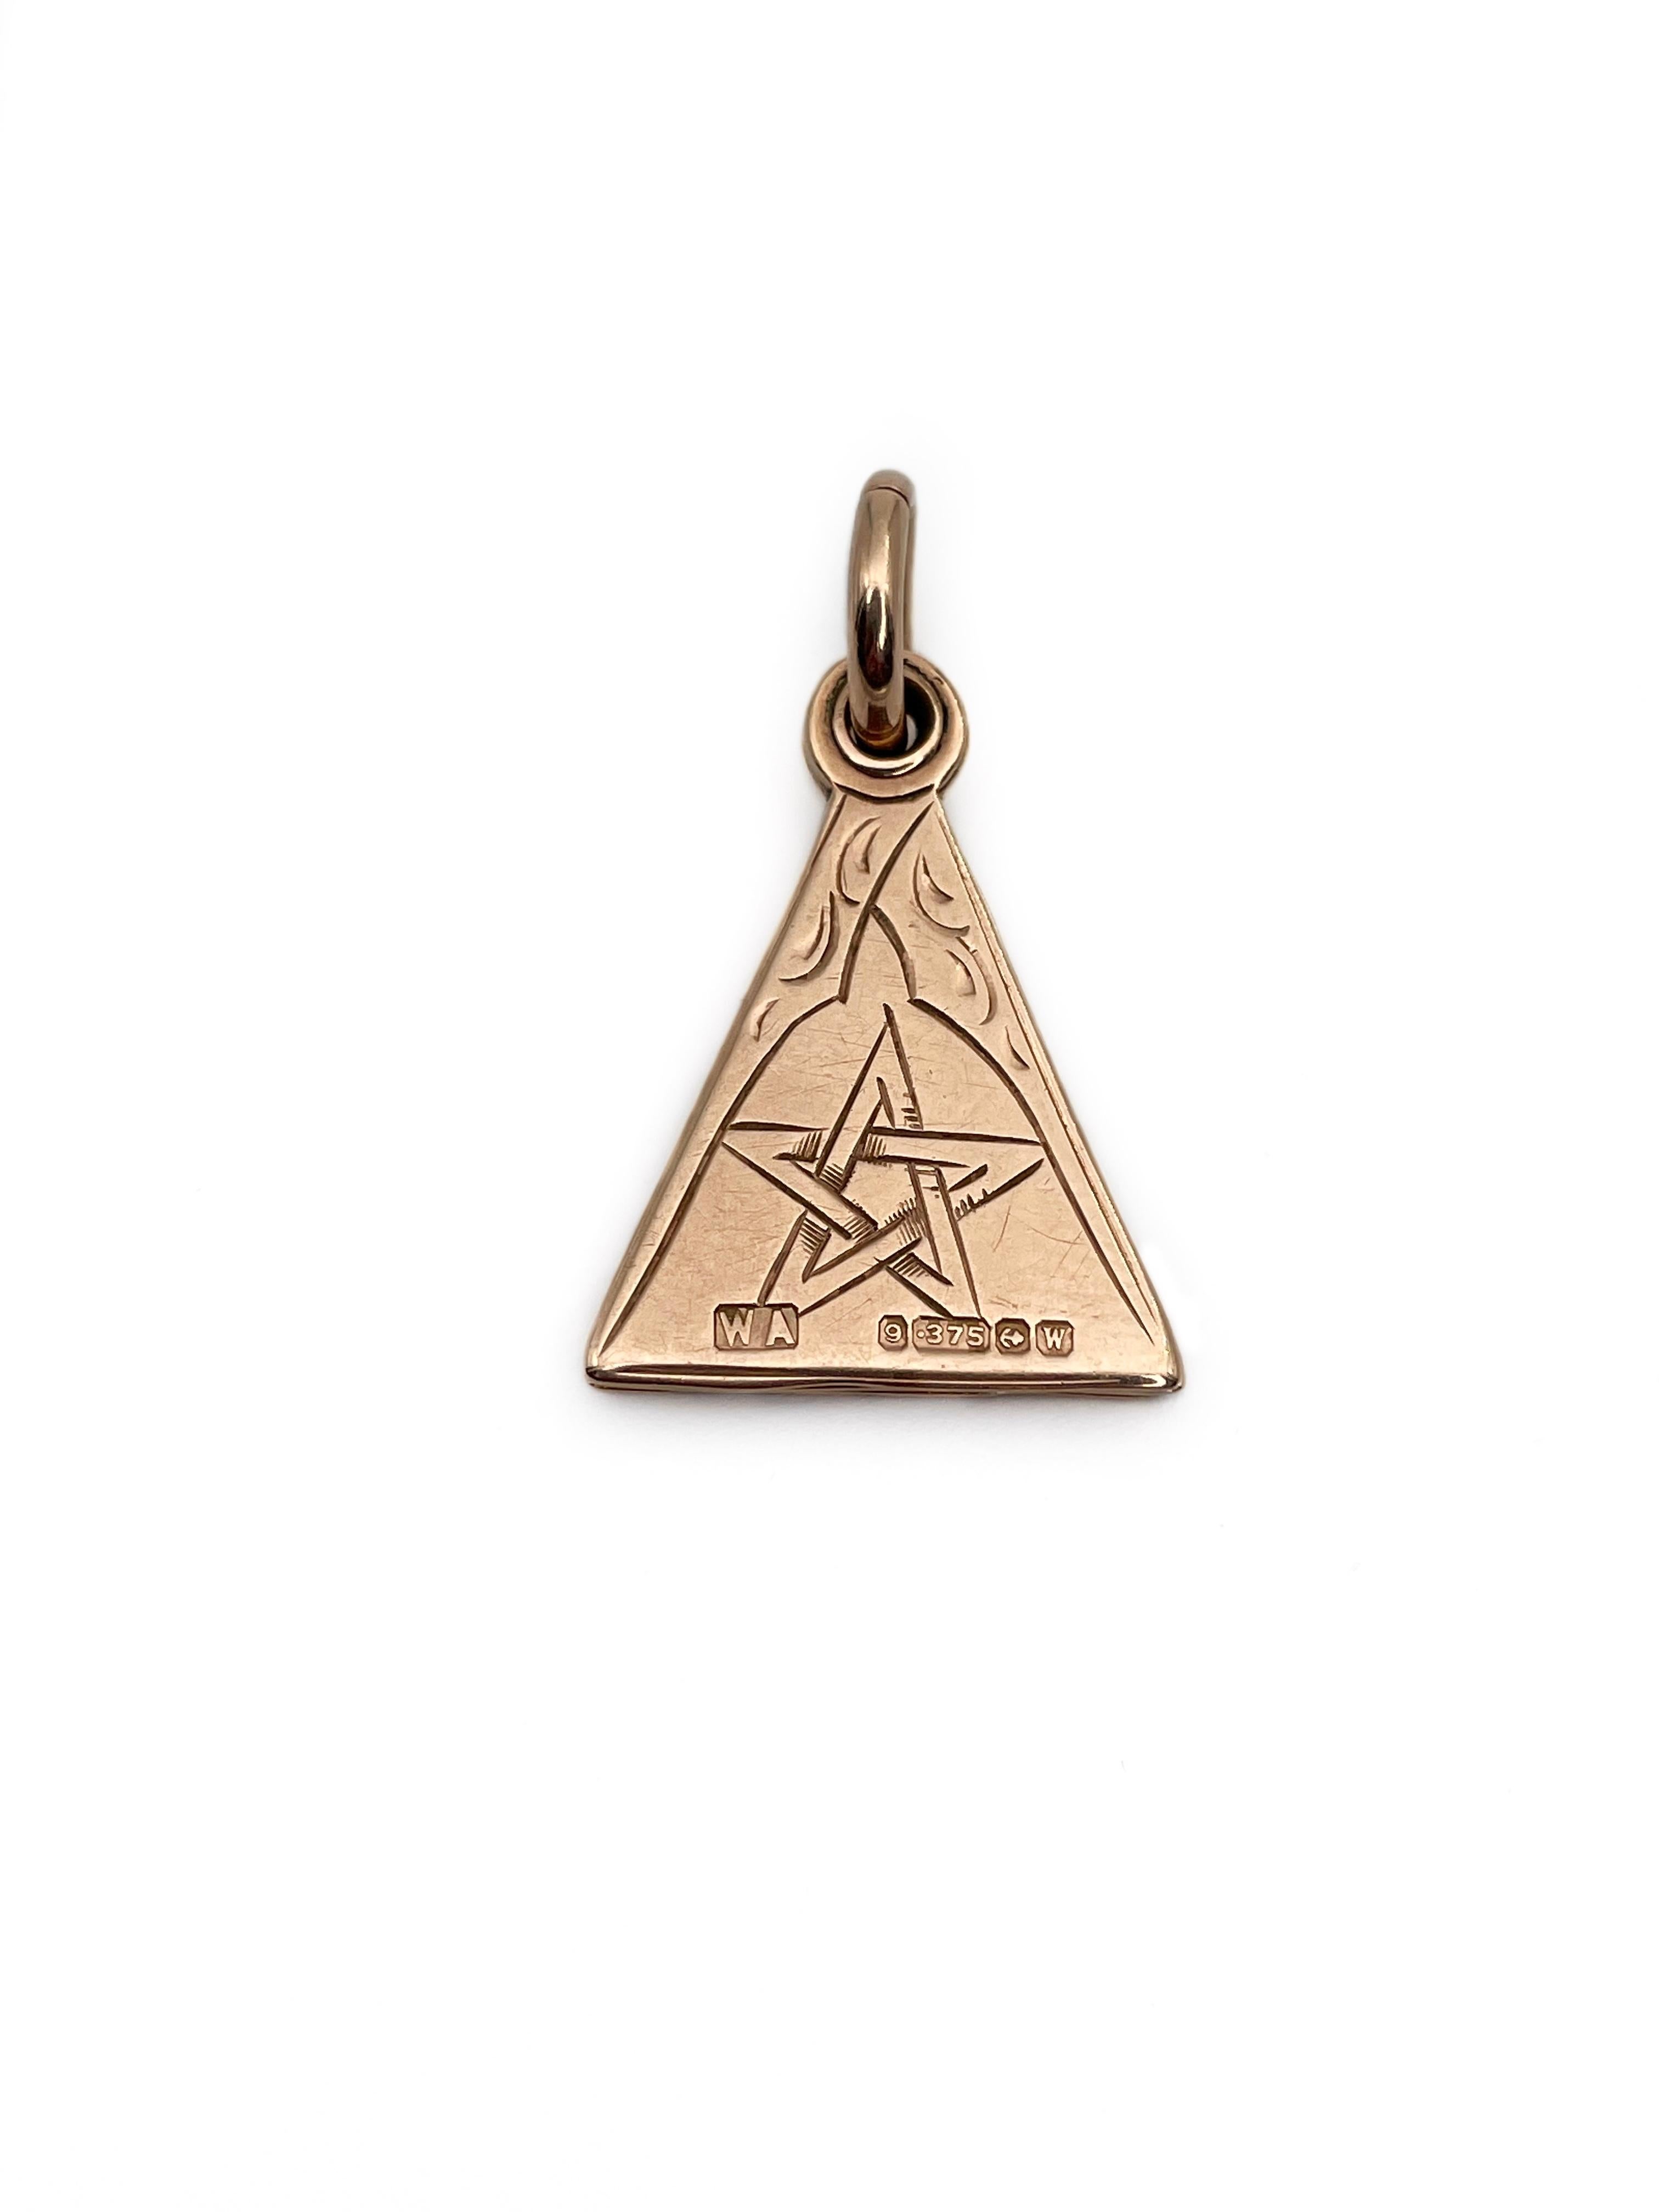 This is a Masonic charm pendant crafted in 9K yellow gold. The piece features four swivel sections with masonic symbols depicted on them. 

It has hallmarks that can be seen in photos.

Weight: 3.84g
Size: 2.6x1.6cm